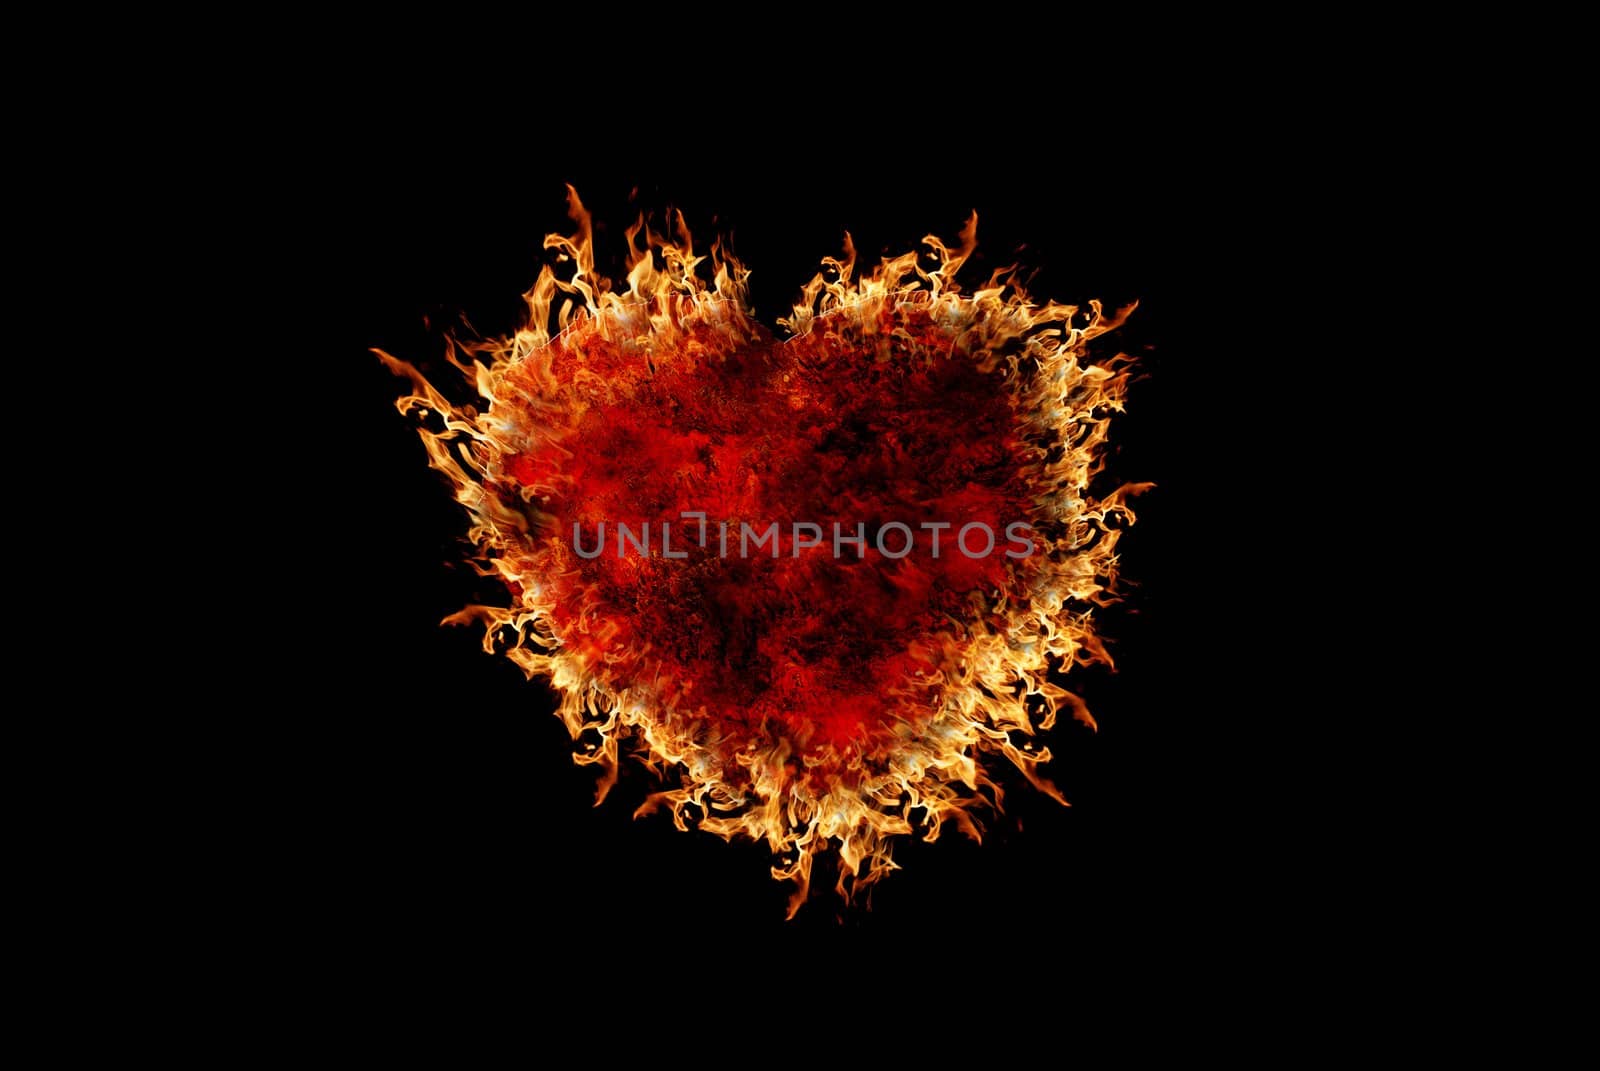 Burning heart with flame effect and black isolated background by sasilsolutions